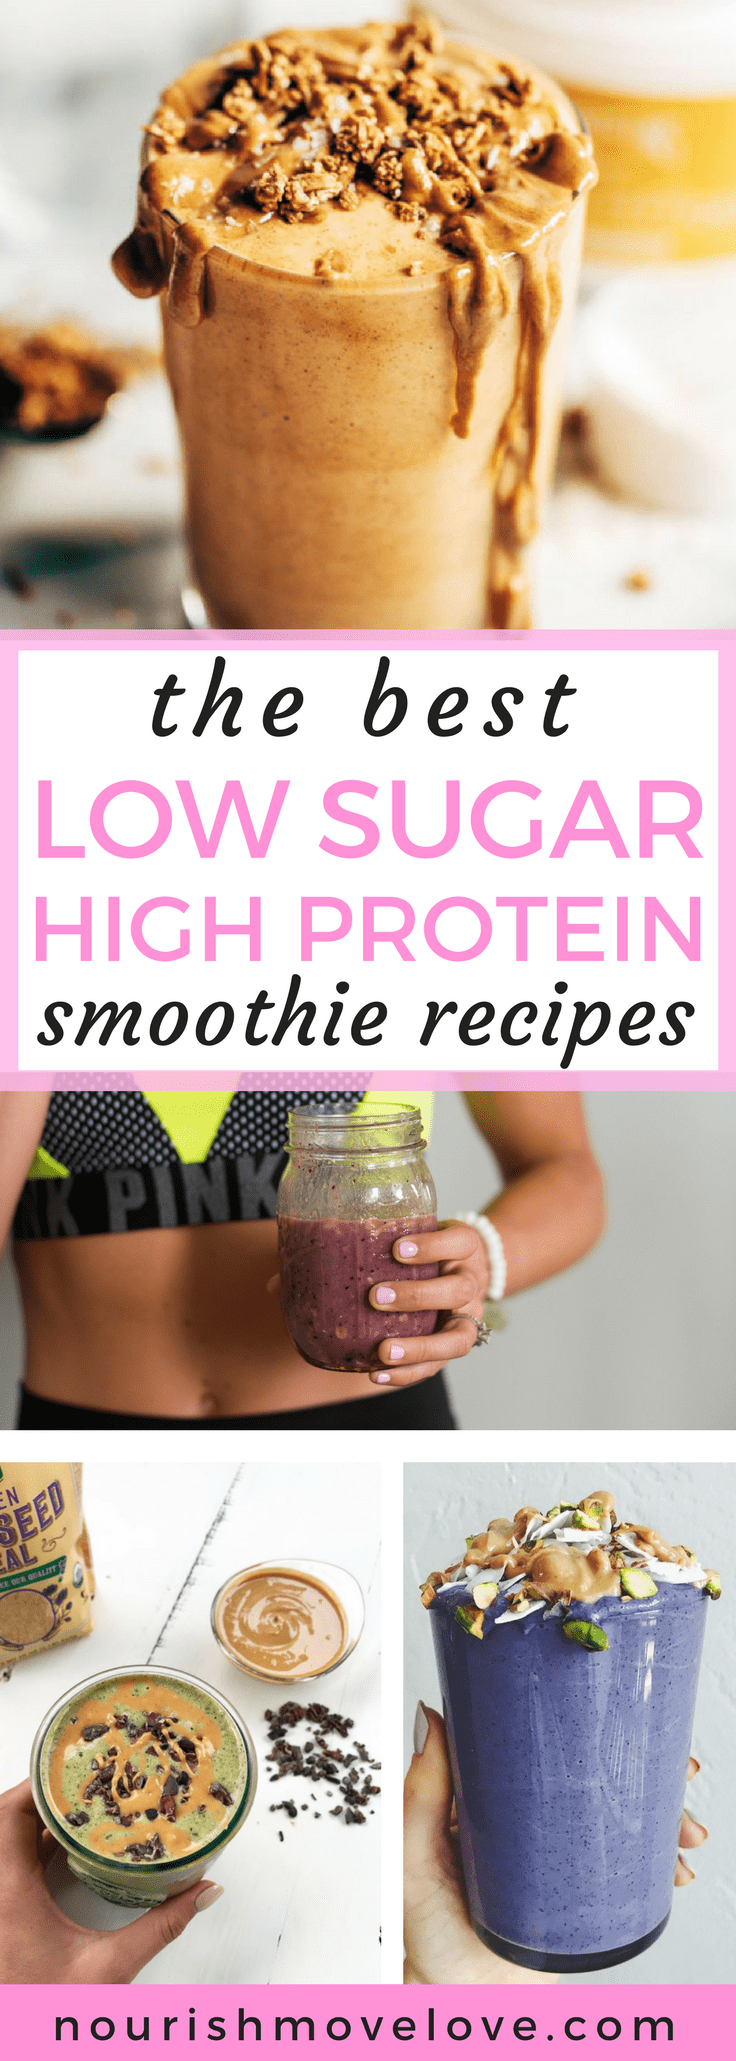 The Best Low Sugar High Protein Smoothie Recipes | www.nourishmovelove.com